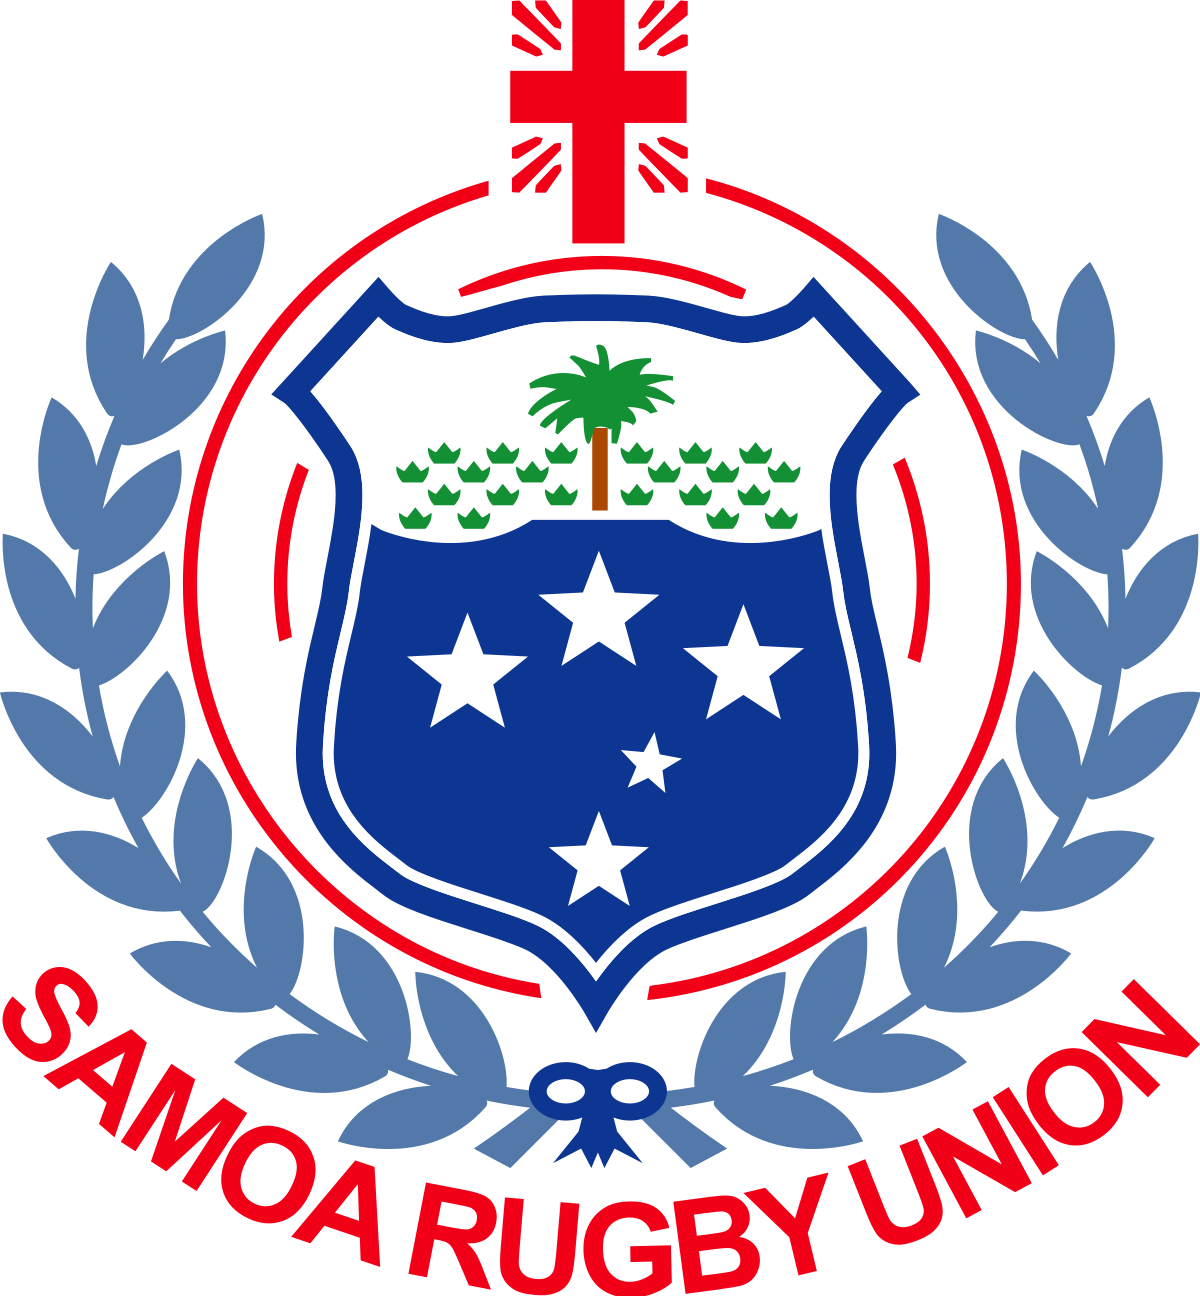 Match Drawing Rugby - Samoa Rugby Union Logo - HD Wallpaper 